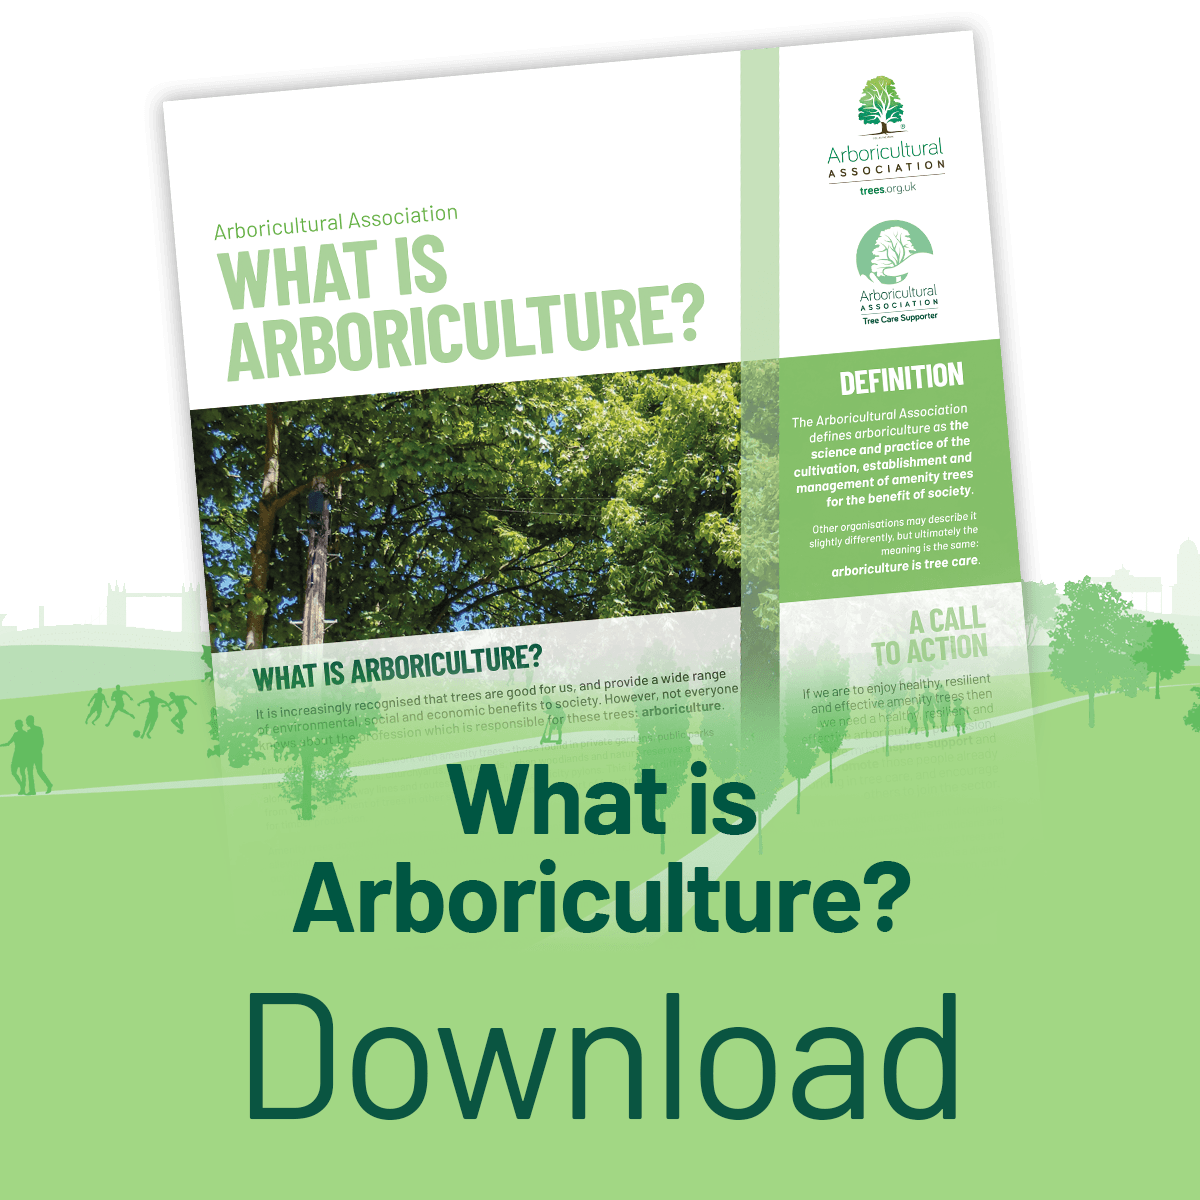 Download the Waht is Arboriculture? leaflet